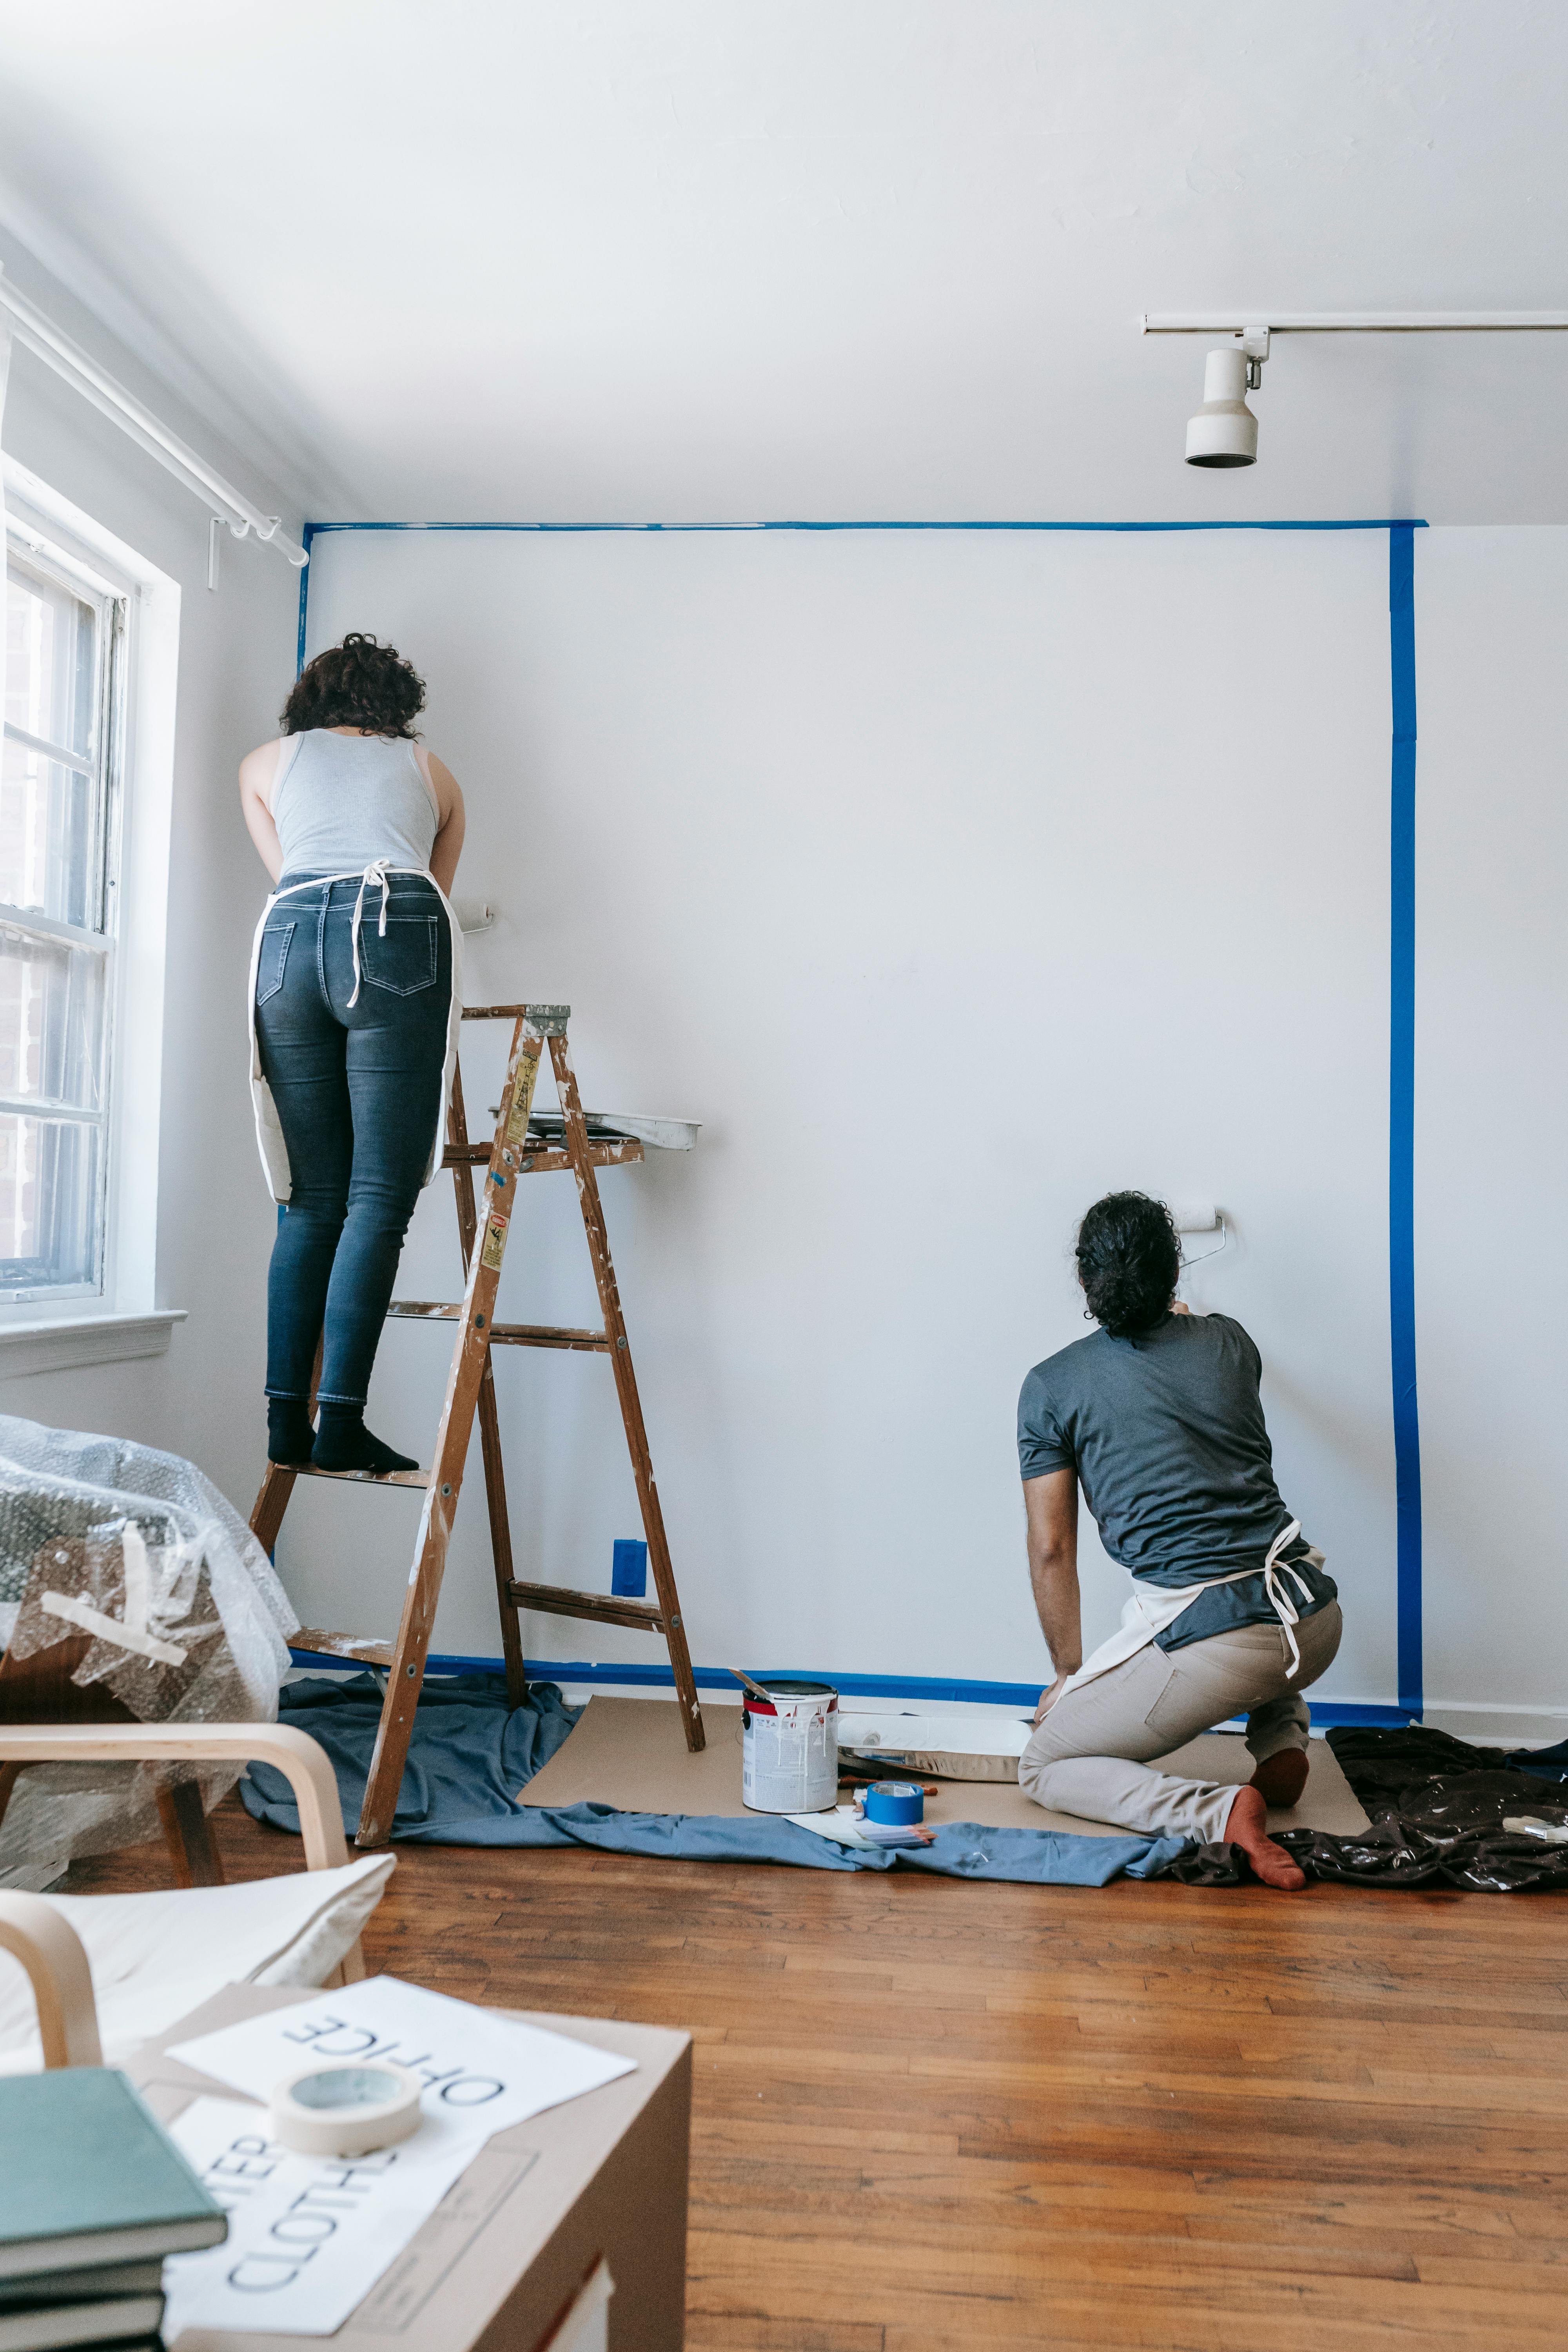 Two people painting a wall. For illustration purposes only | Source: Pexels